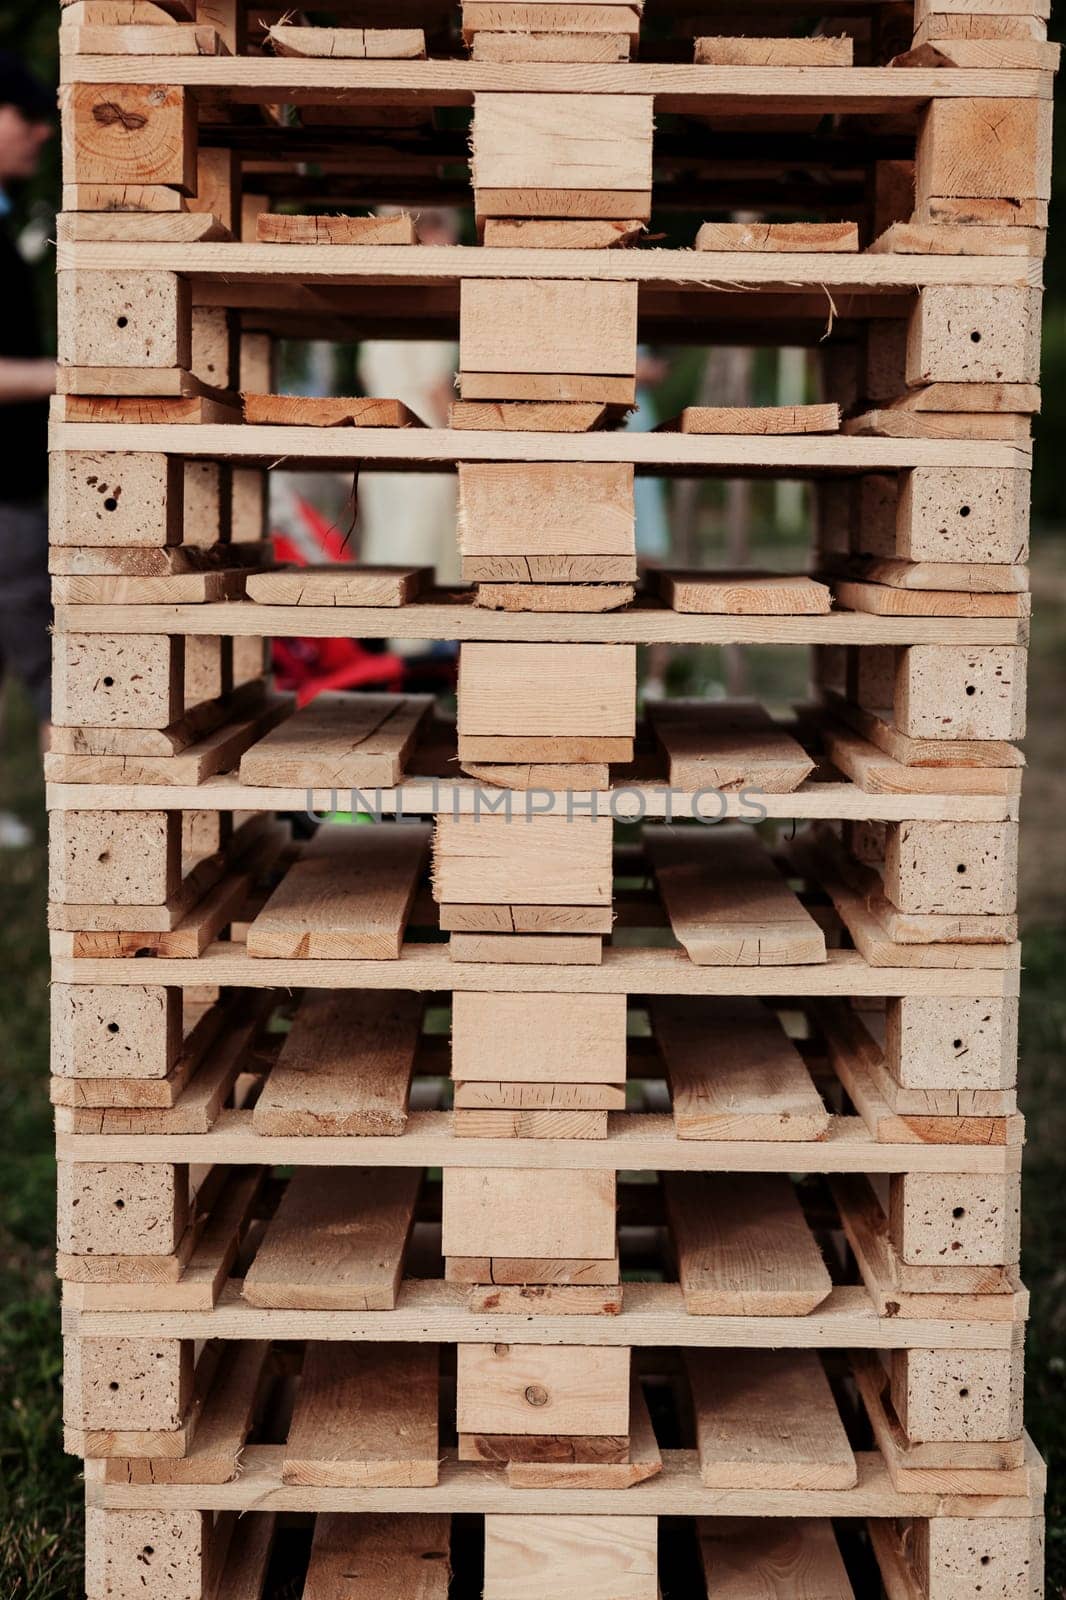 stacks of wooden pallets for industrial and transport